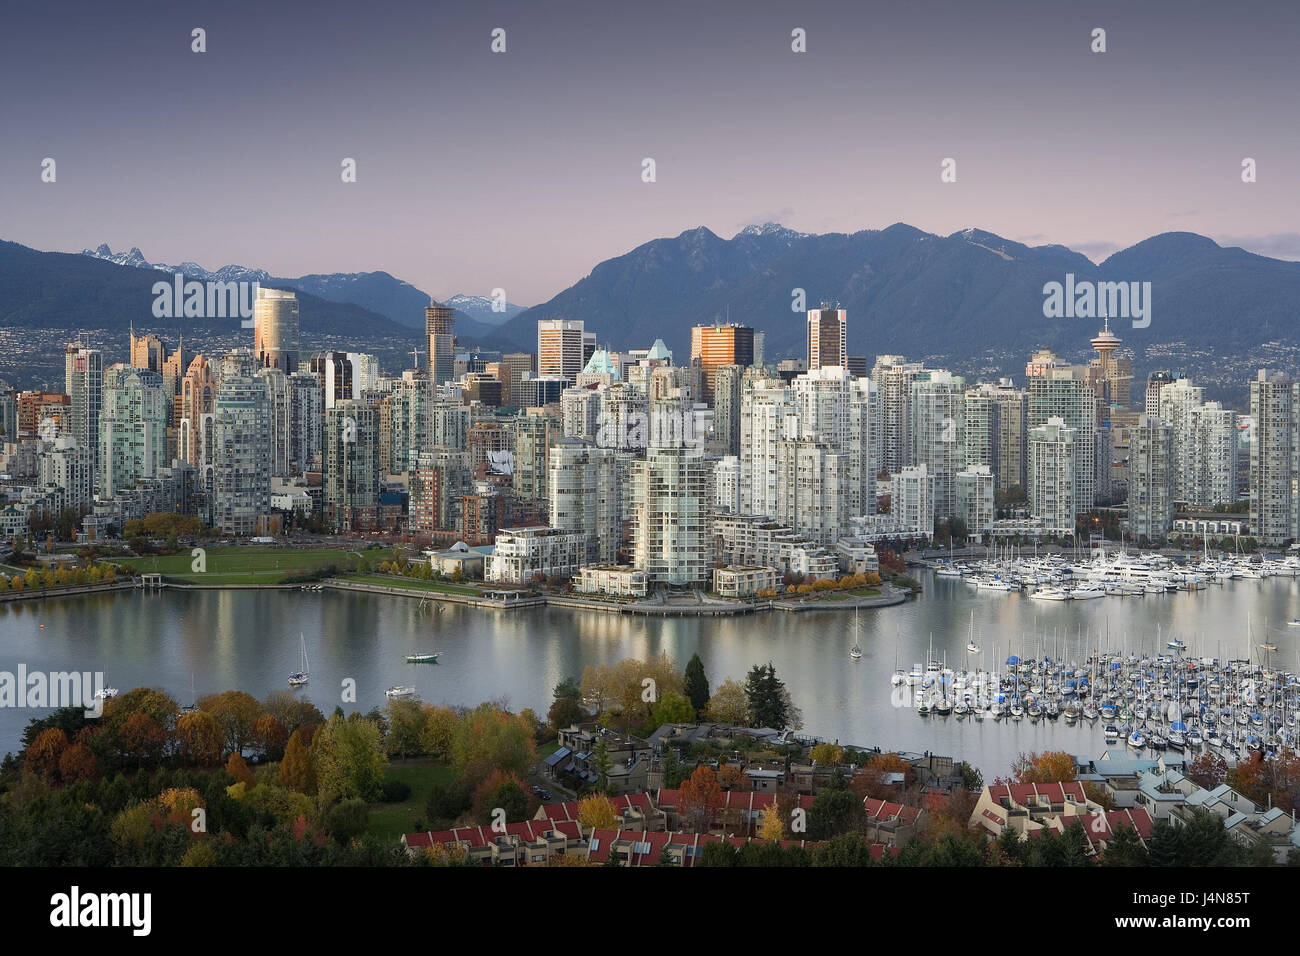 Canada, British Columbia, Vancouver, False Creek, centre of the city, town view, harbour, North America, British Colombia, town, port, high rises, buildings, architecture, water, boats, yacht harbour, dusk, mountains, Stock Photo